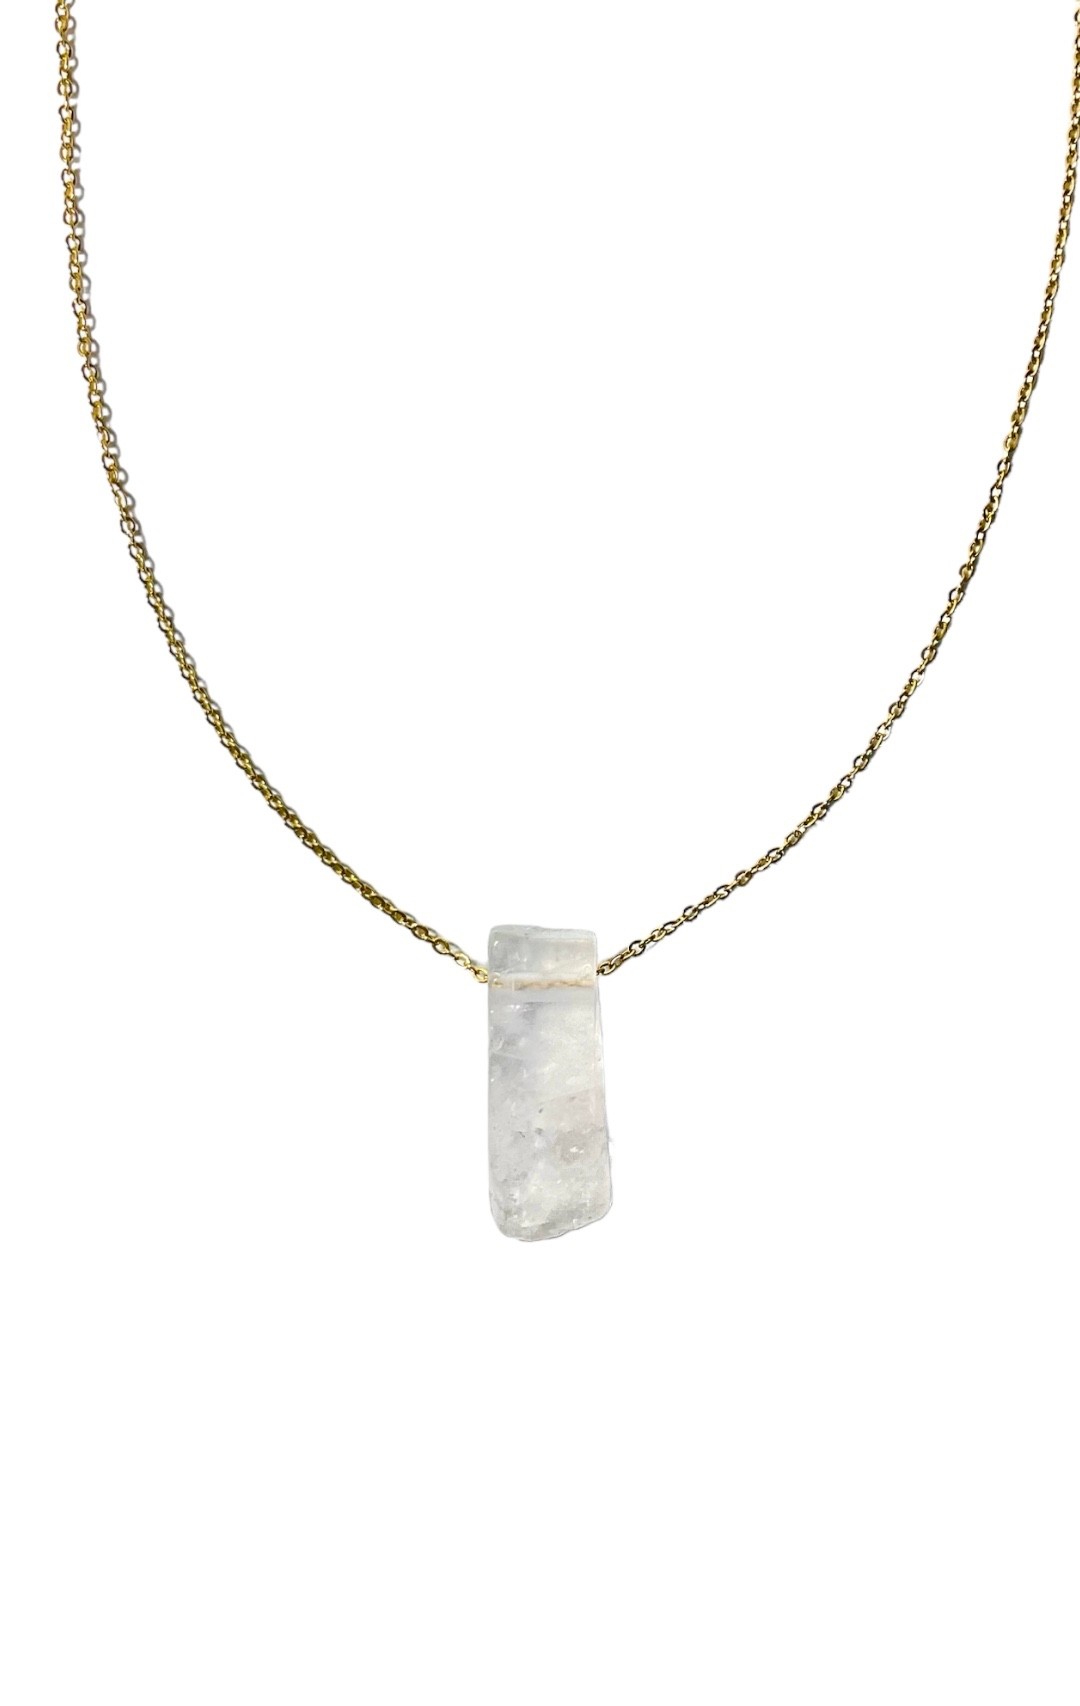 Quartz,18k gold plated natural stone necklace on steel